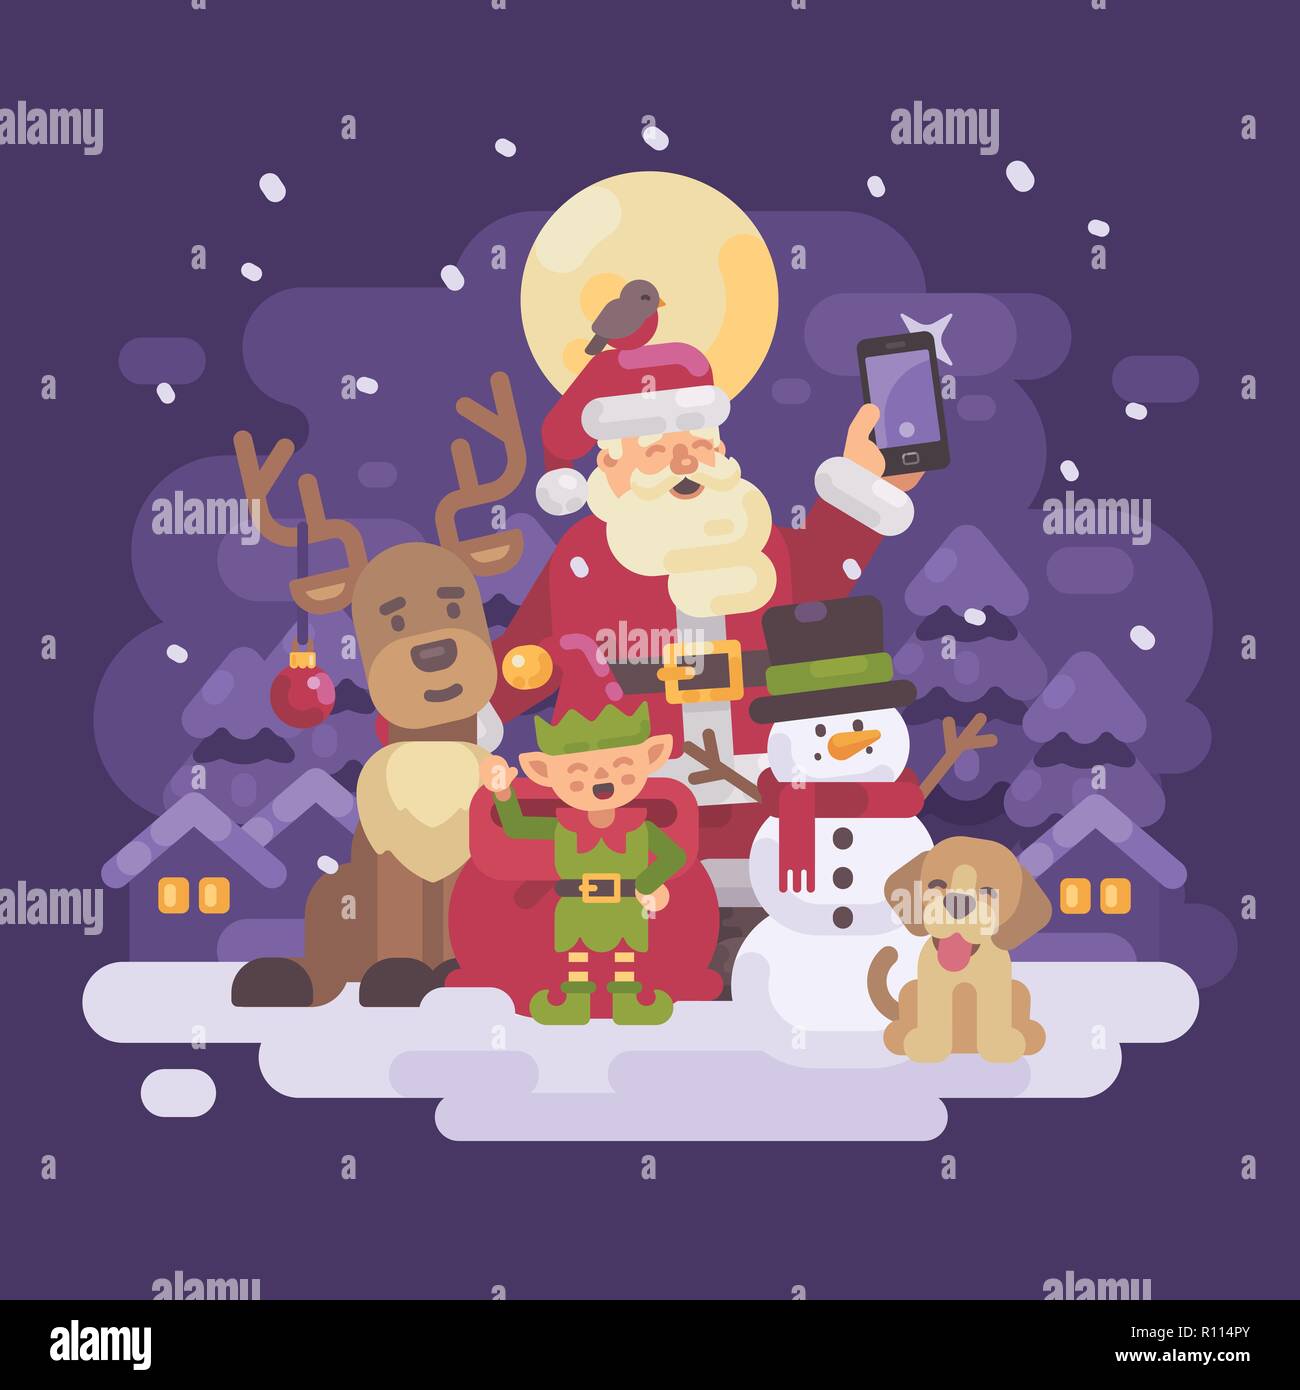 Santa Claus with reindeer, elf, snowman and dog taking a selfie in a snowy night winter village landscape. Christmas characters greeting card flat ill Stock Vector